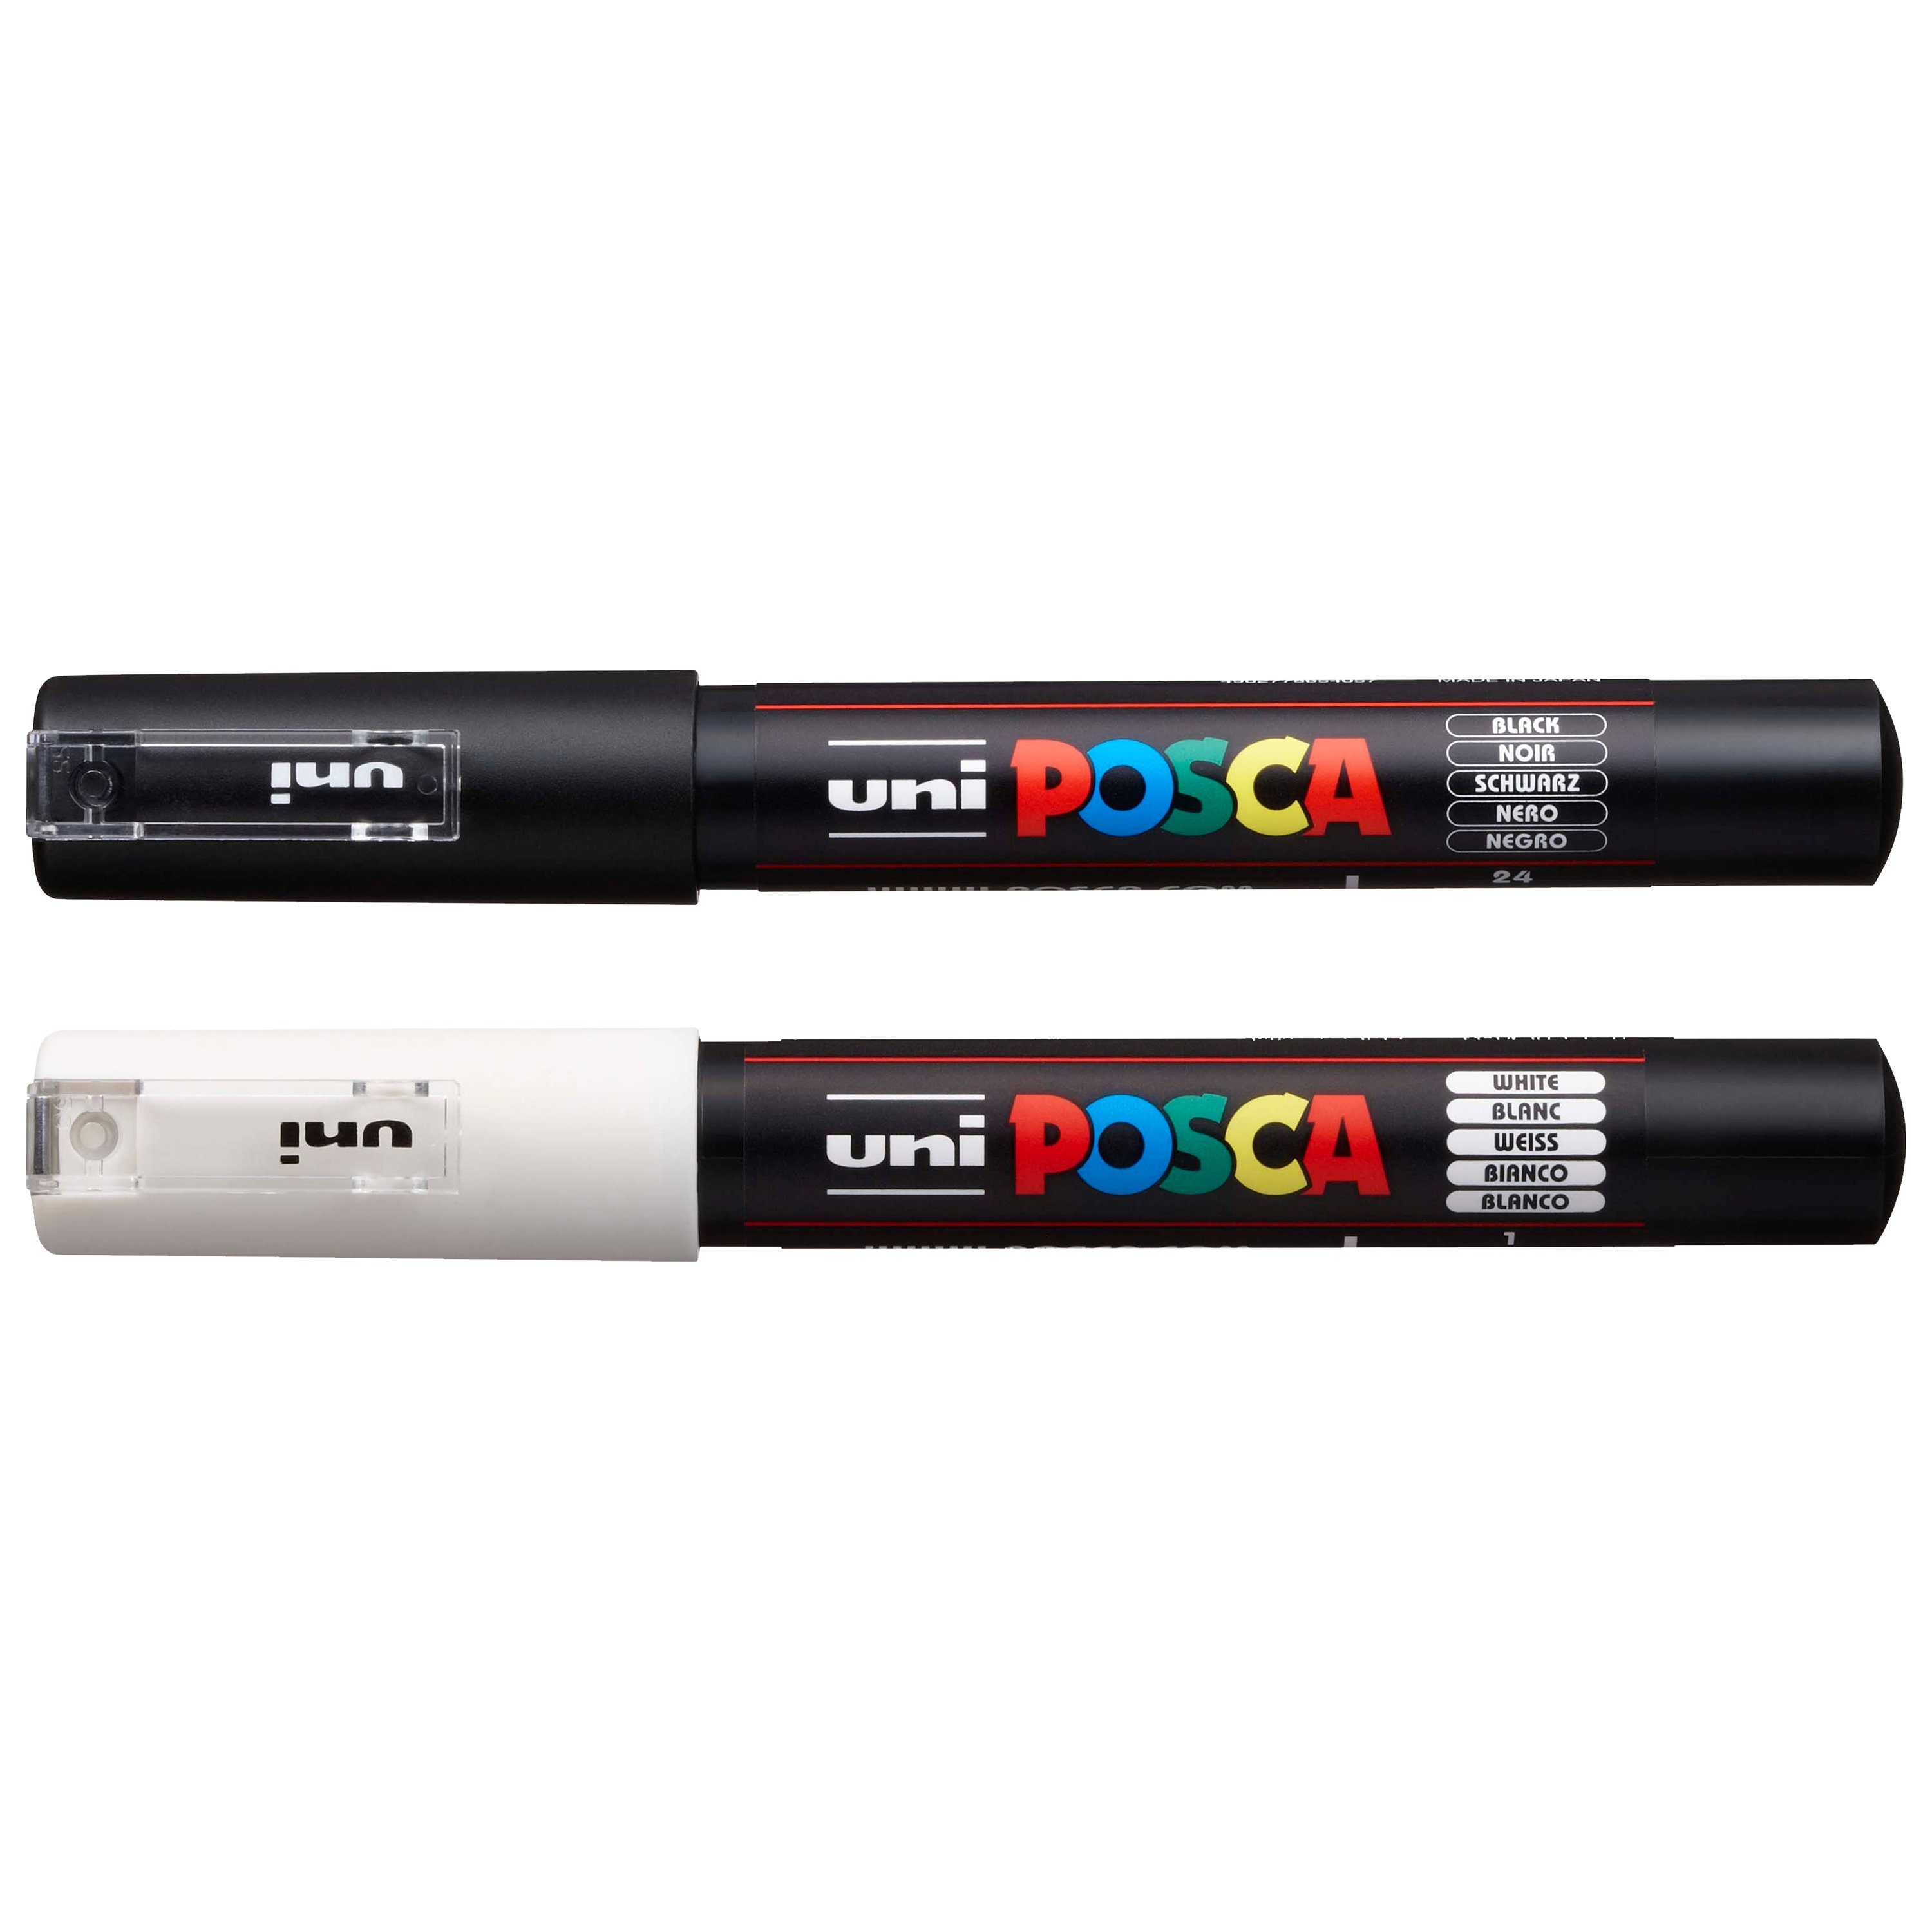 POSCA Fine PC-3M Art Paint Marker Pens Drawing Poster Coloring Markers All  Colours Metal Fabric Paper Terracotta Stone Glass -  Denmark